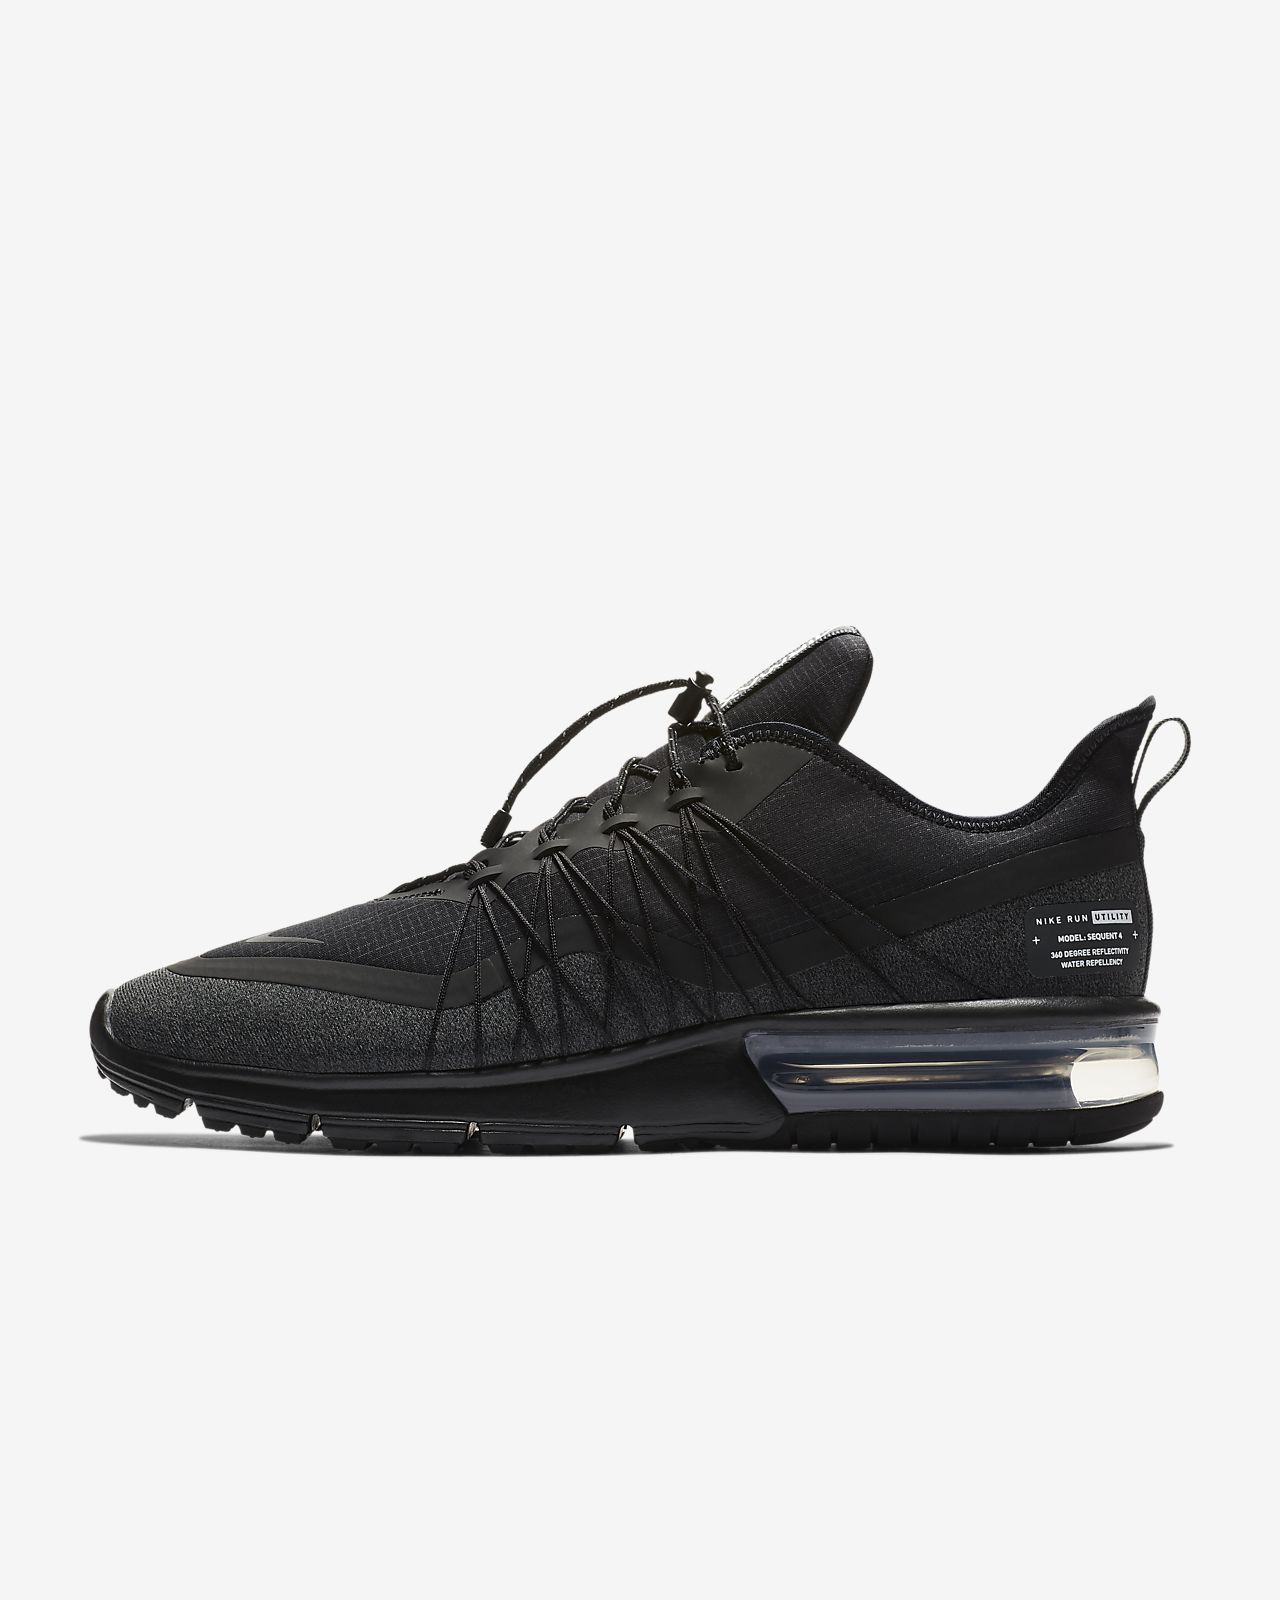 nike air max sequent 4 running